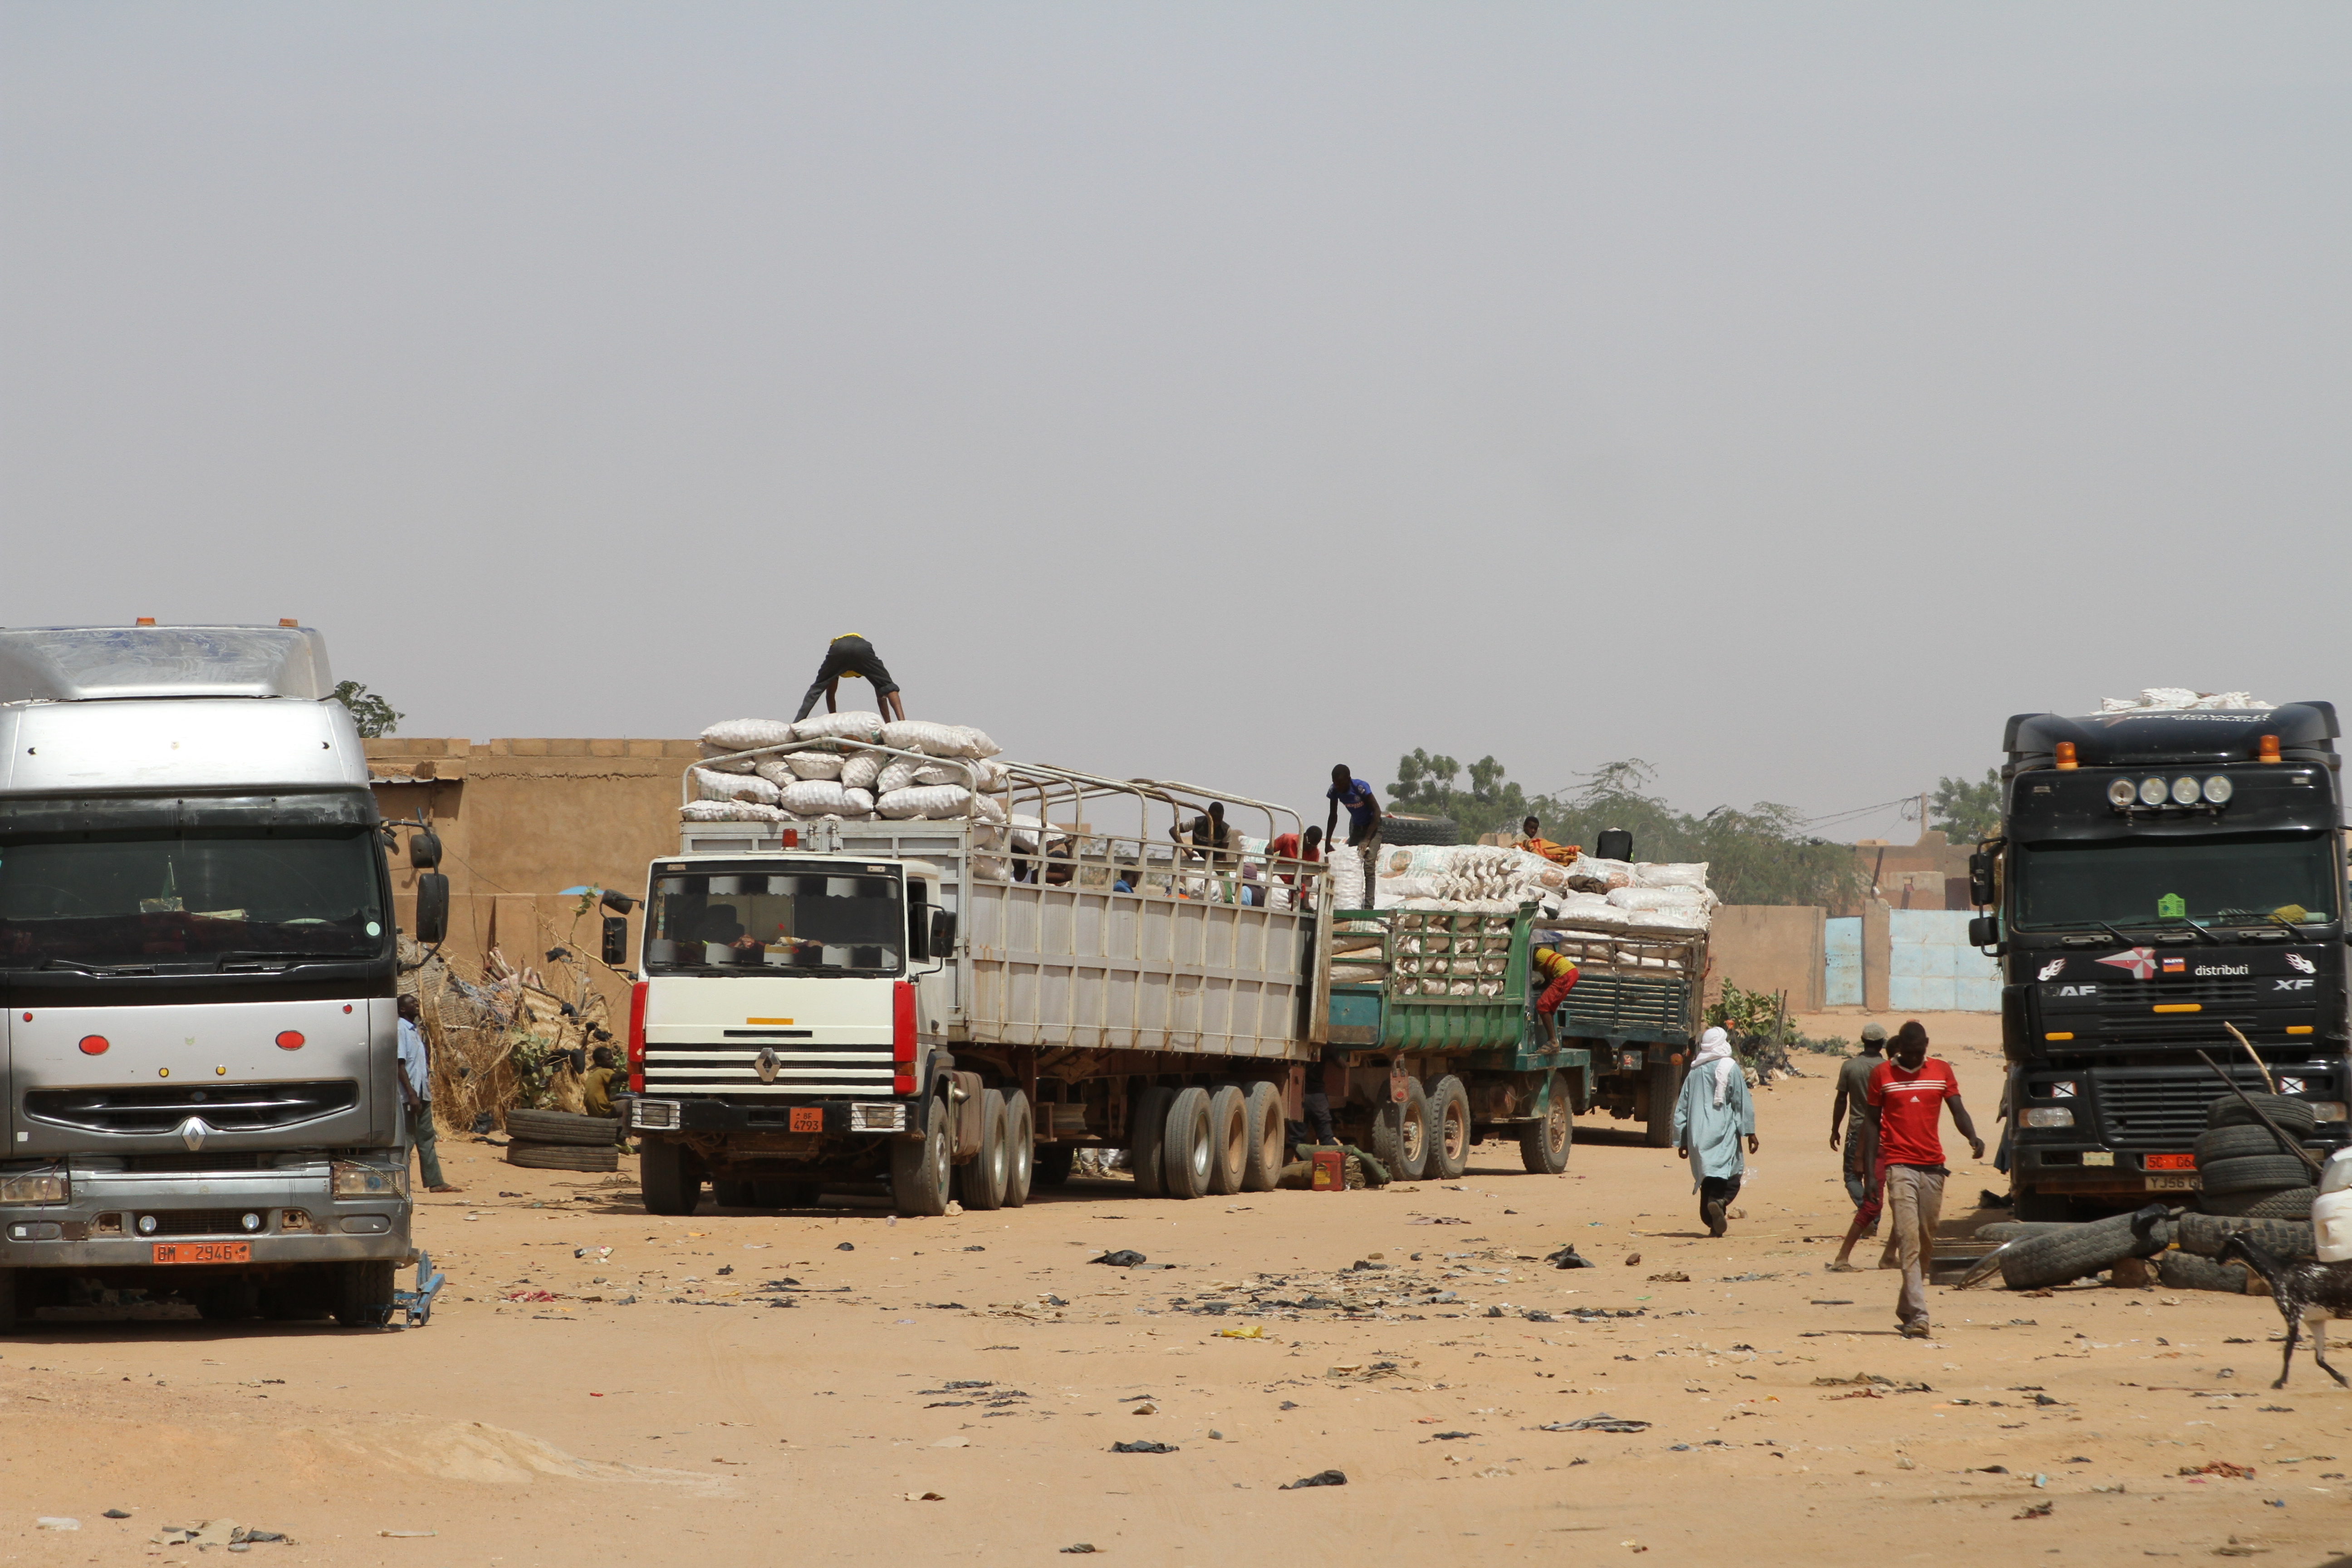 Trucks are prepared for transport through the Sahara in Agadez, Niger, 26 October 2017. Migrants were allowed to travel through the desert to Libya until 2015. Photo by: Kristin Palitza/picture-alliance/dpa/AP Images